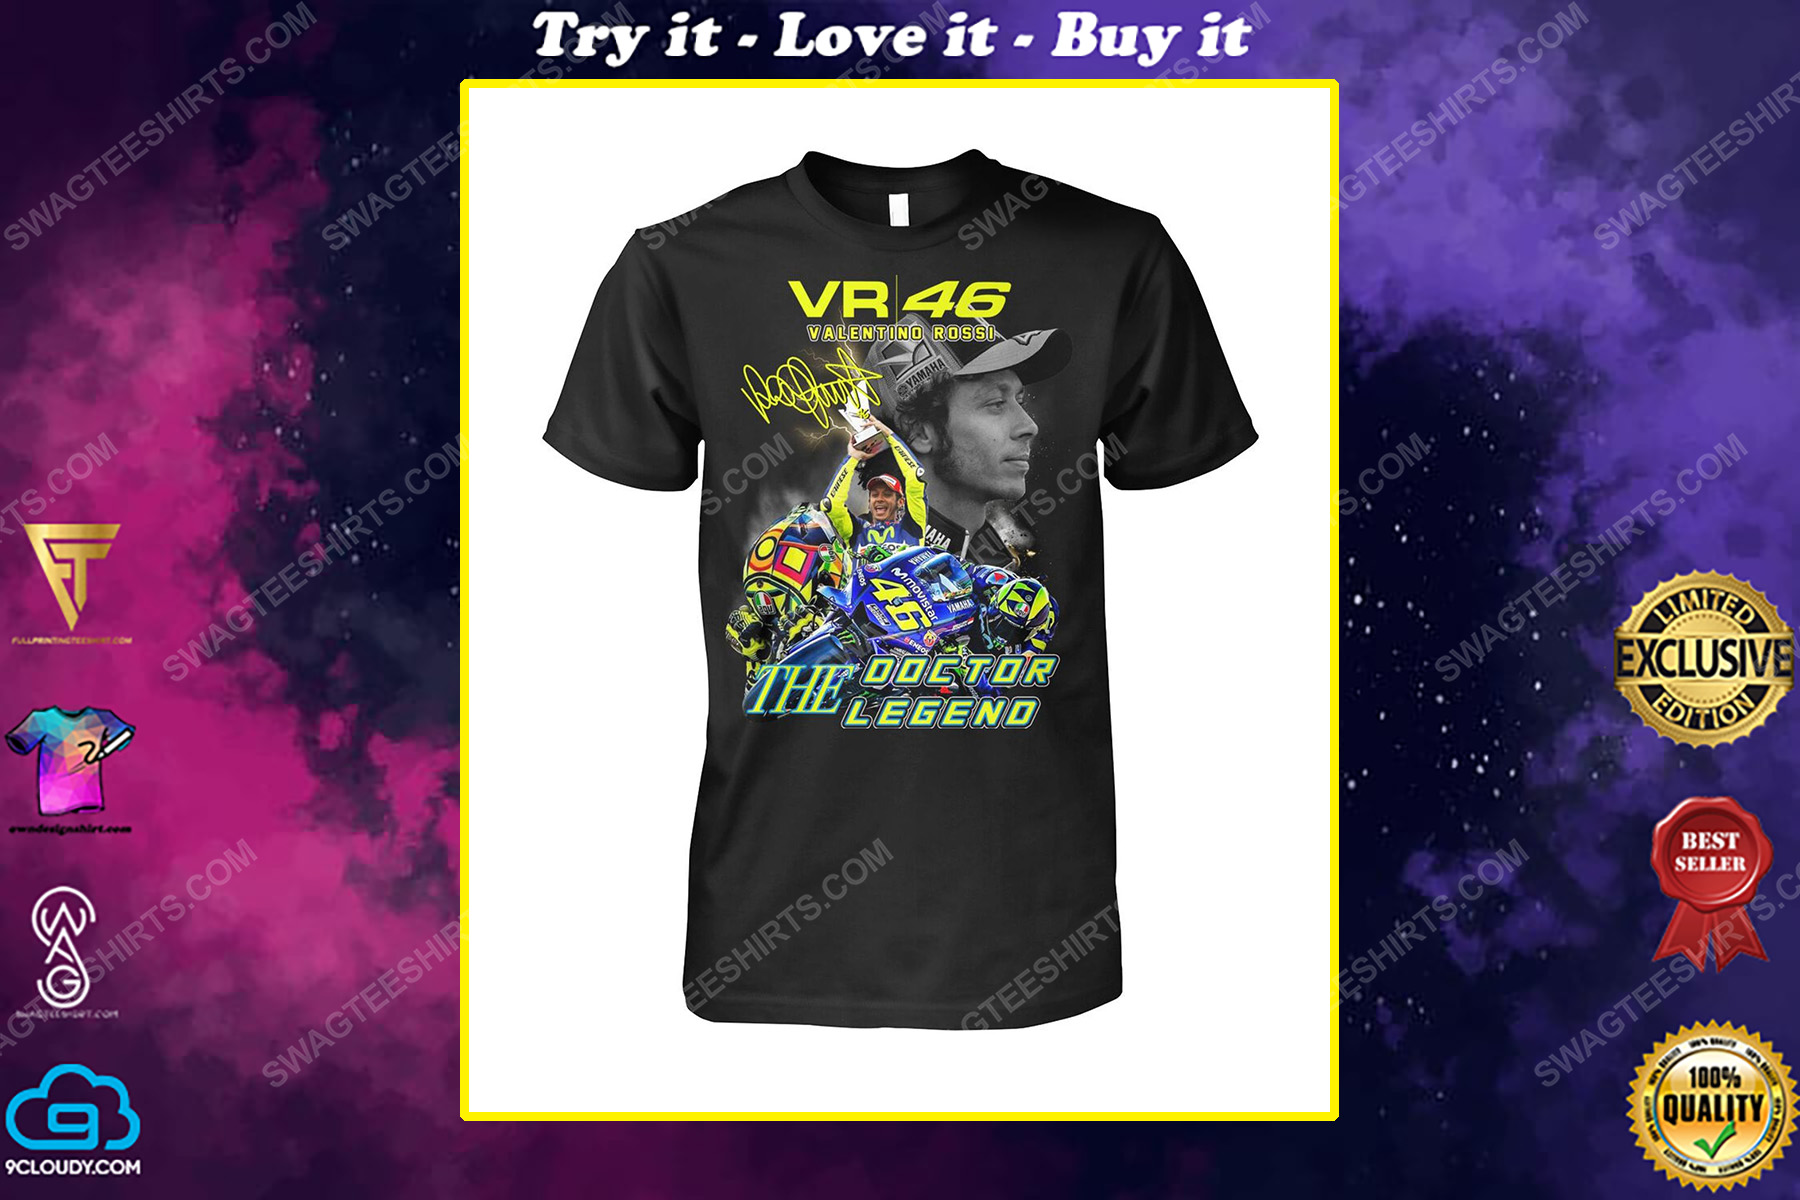 VR46 valentino rossi racing the legend shirt